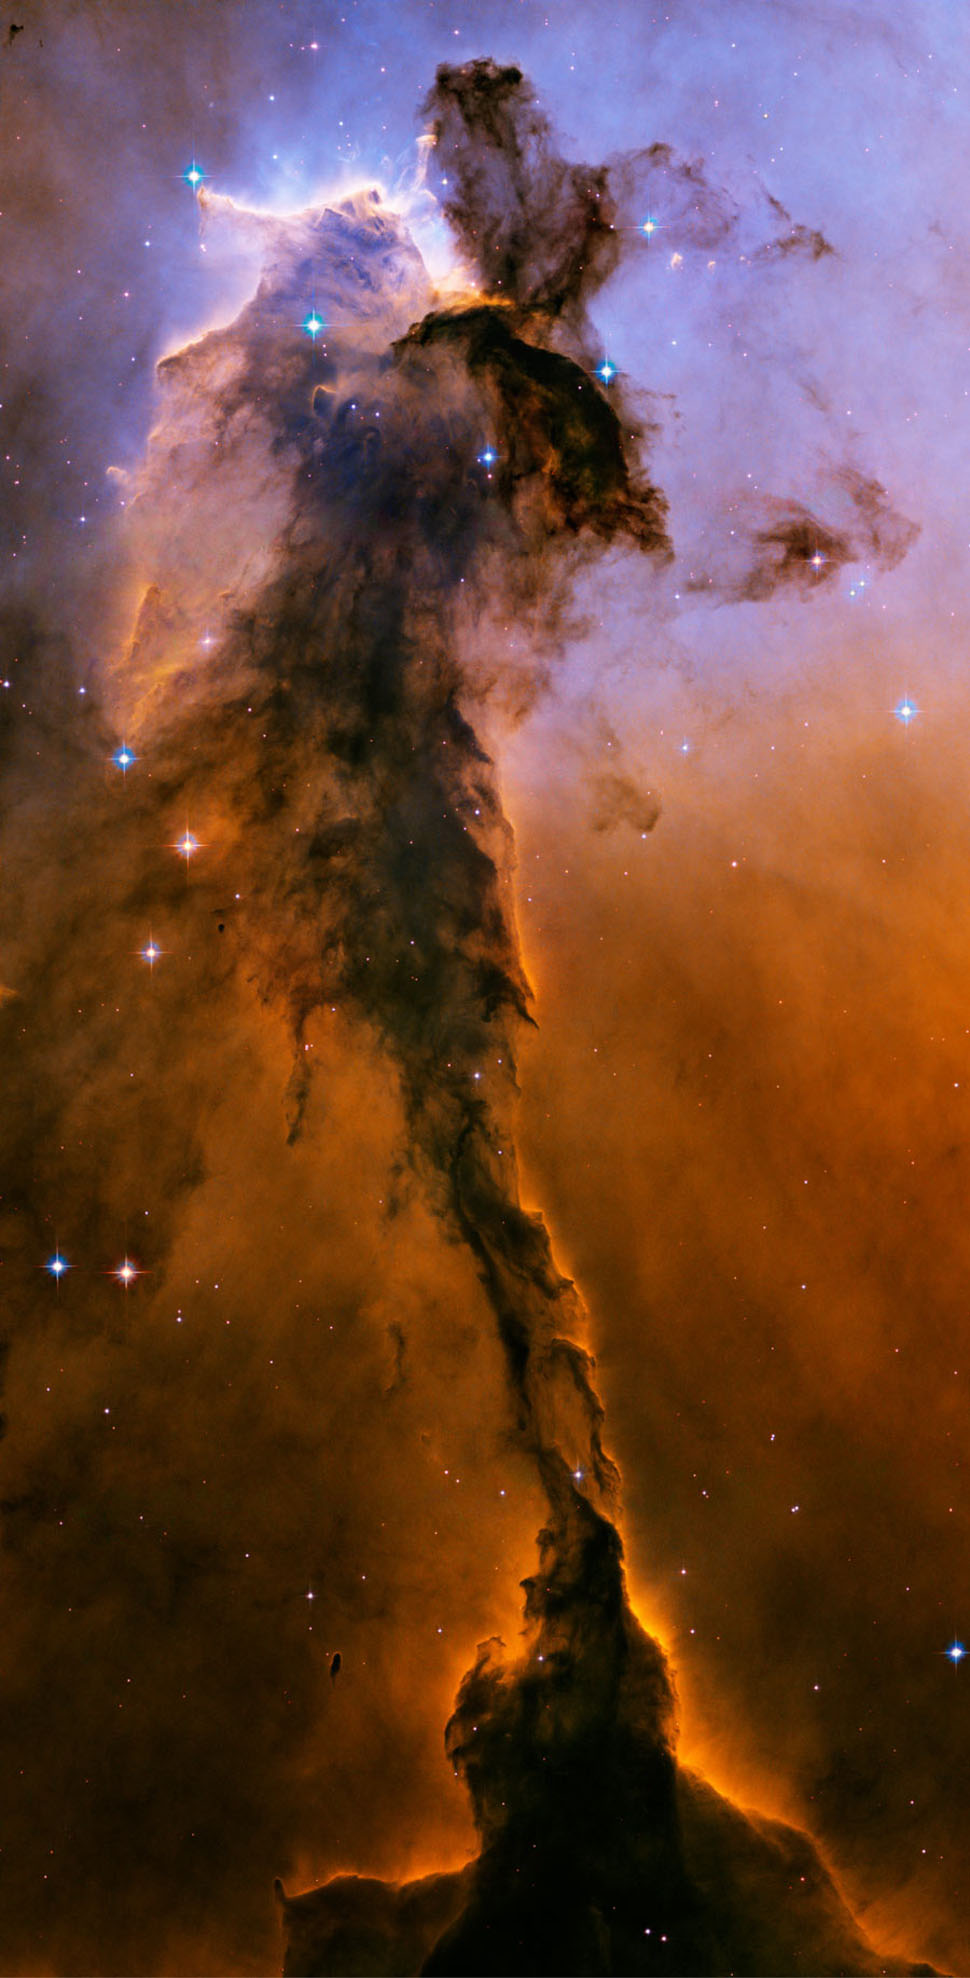 The Eagle Nebula Couldn’t Look Cooler